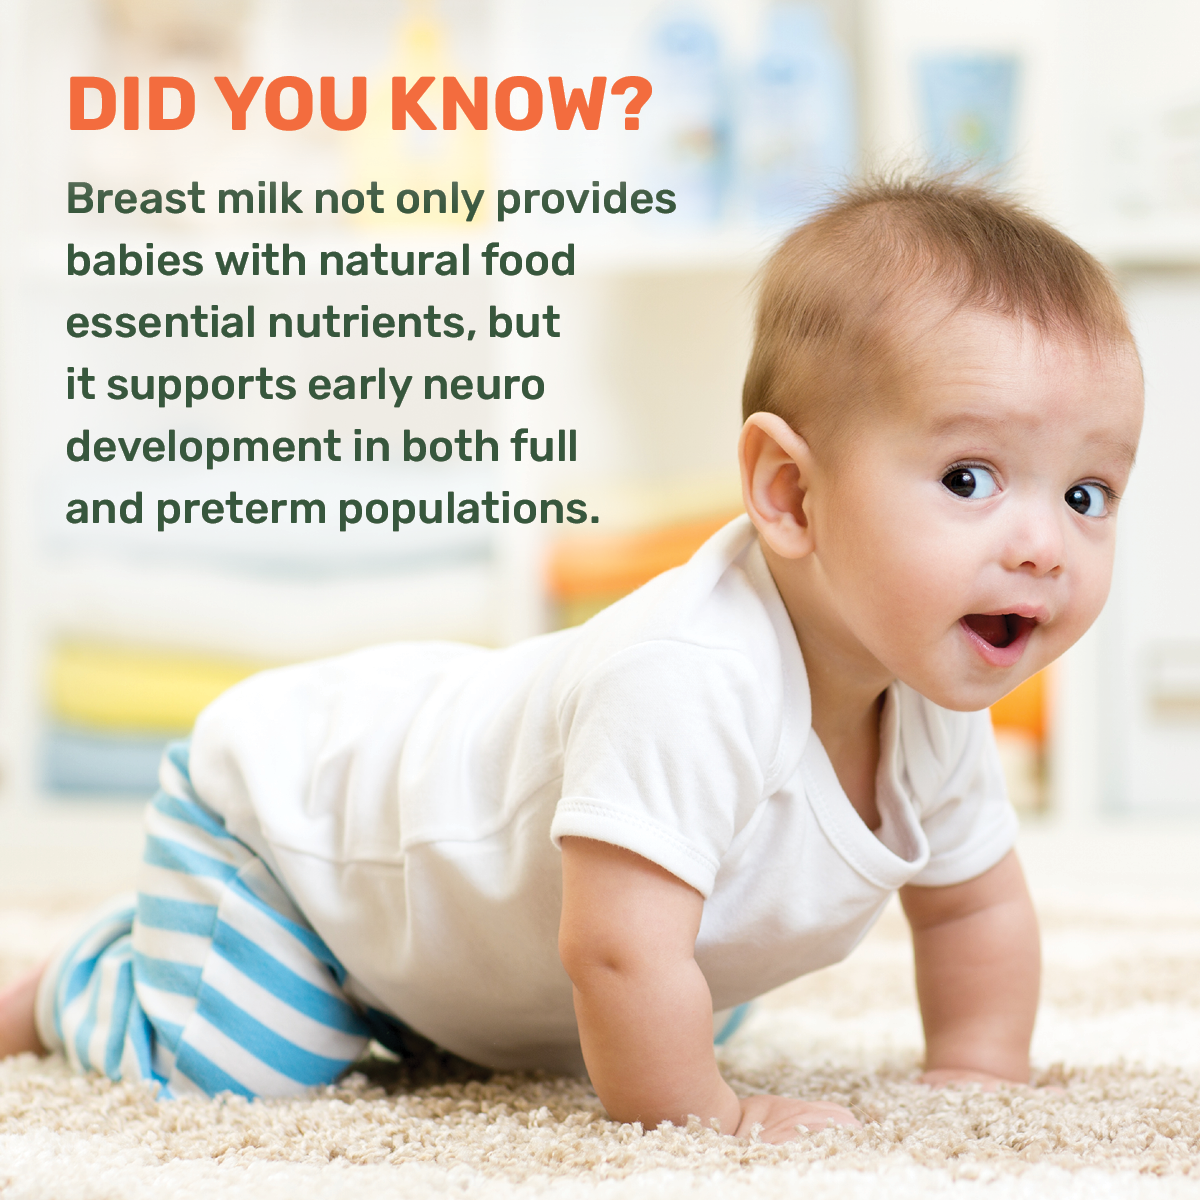 Did you know? Breast milk not only provides babies with natural food essential nutrients, but it supports early neuro development in both full and preterm populations.